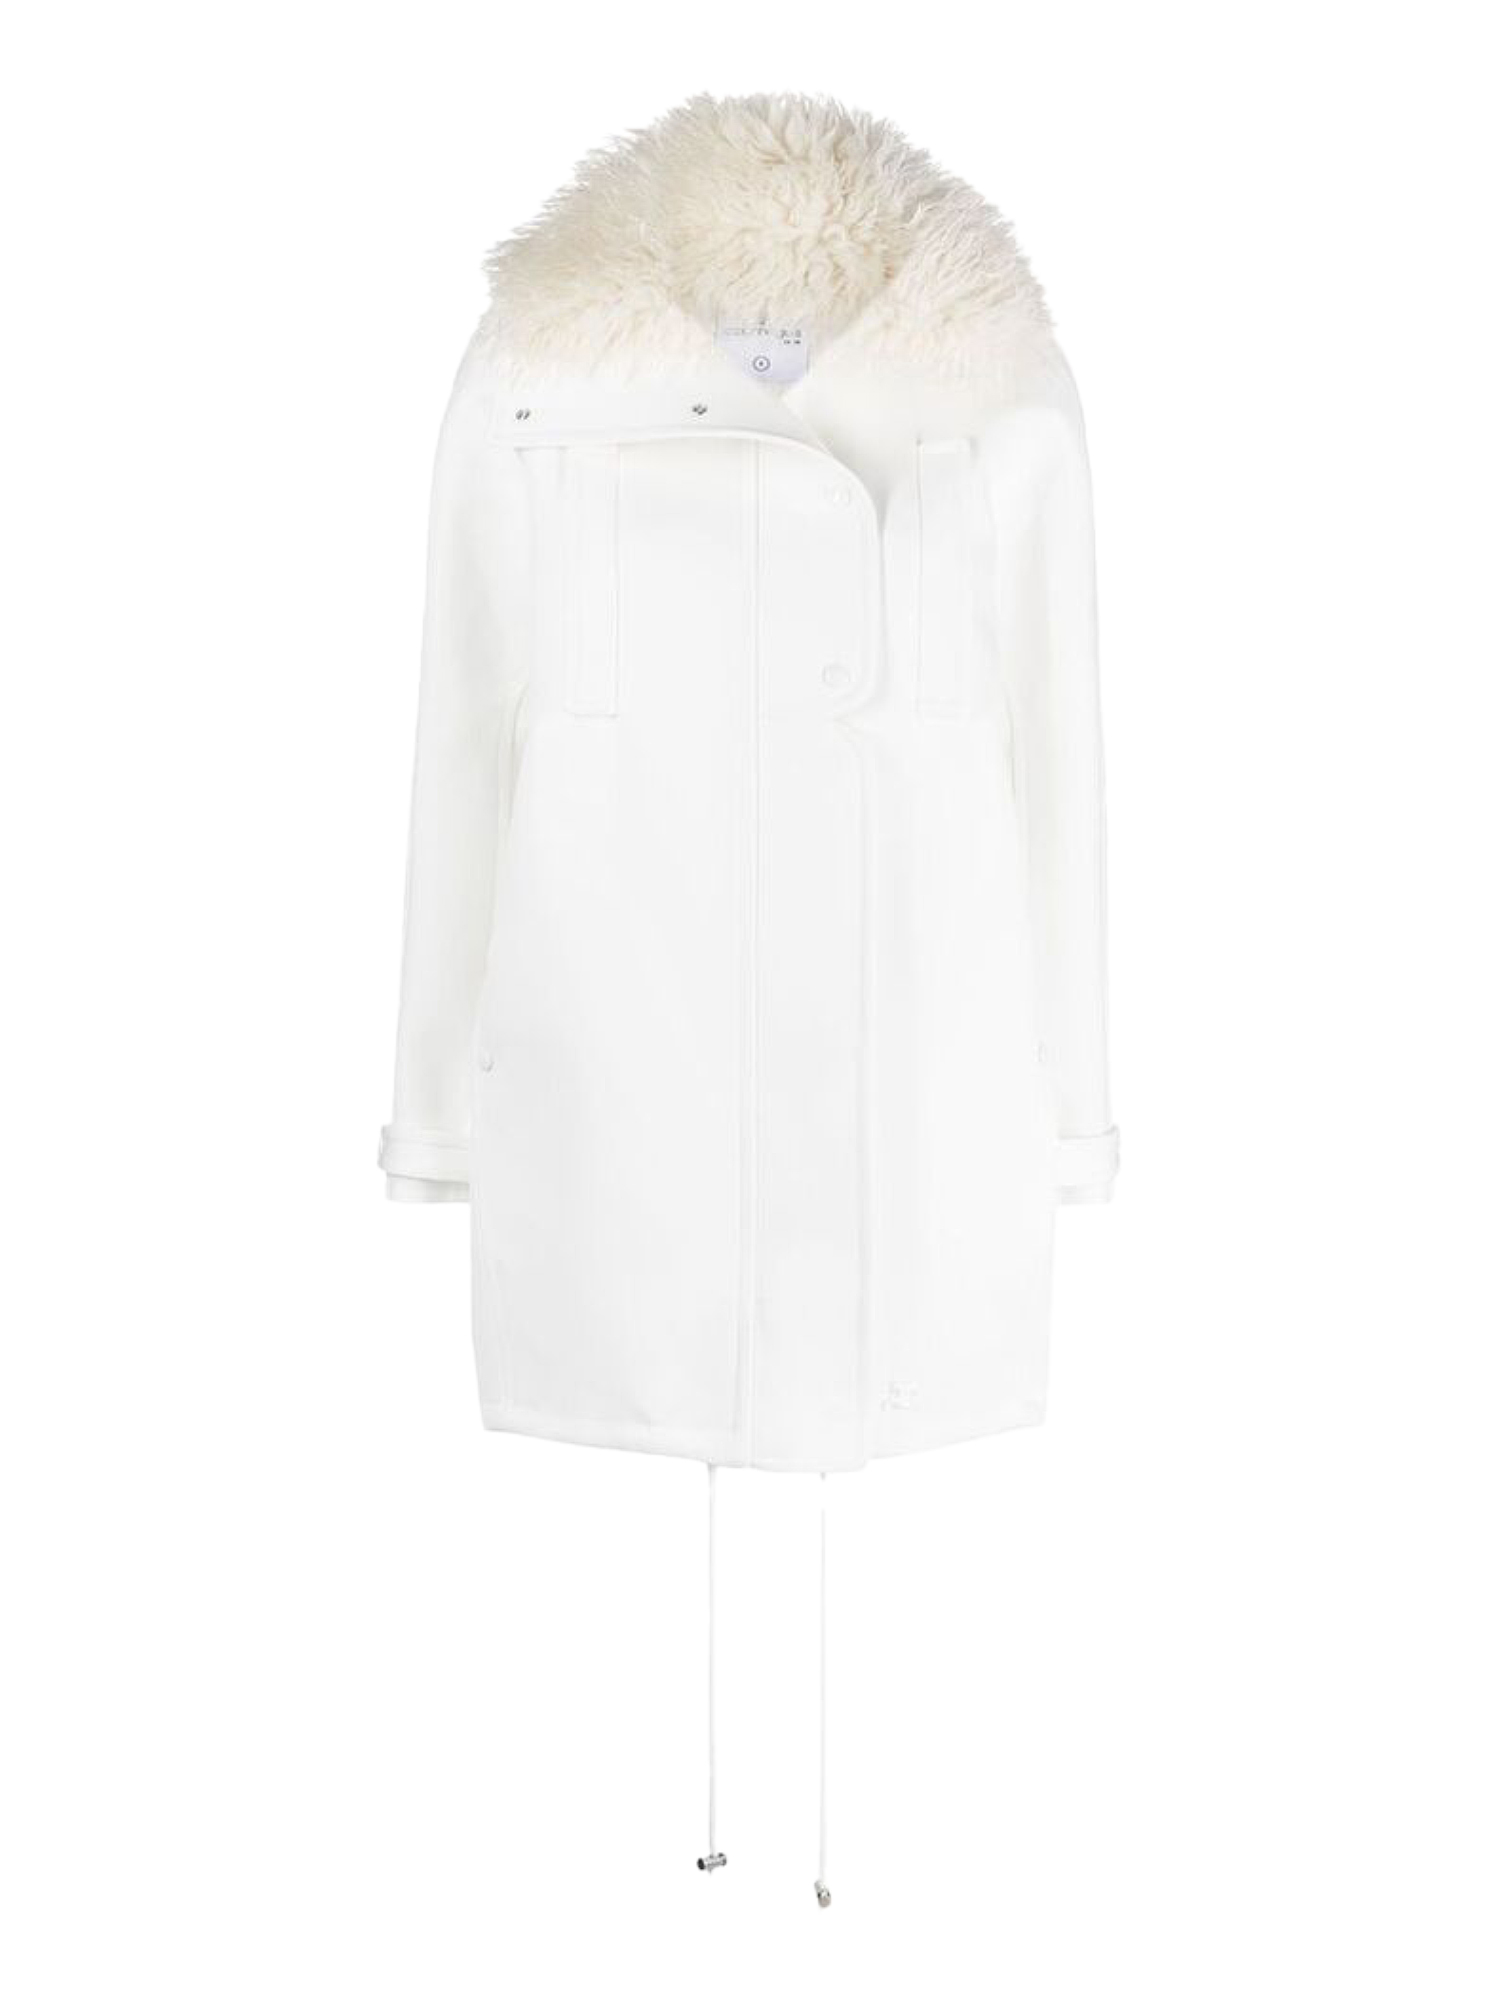 COURRÈGES WOMEN'S OUTWEAR - COURREGES - IN WHITE SYNTHETIC FIBERS